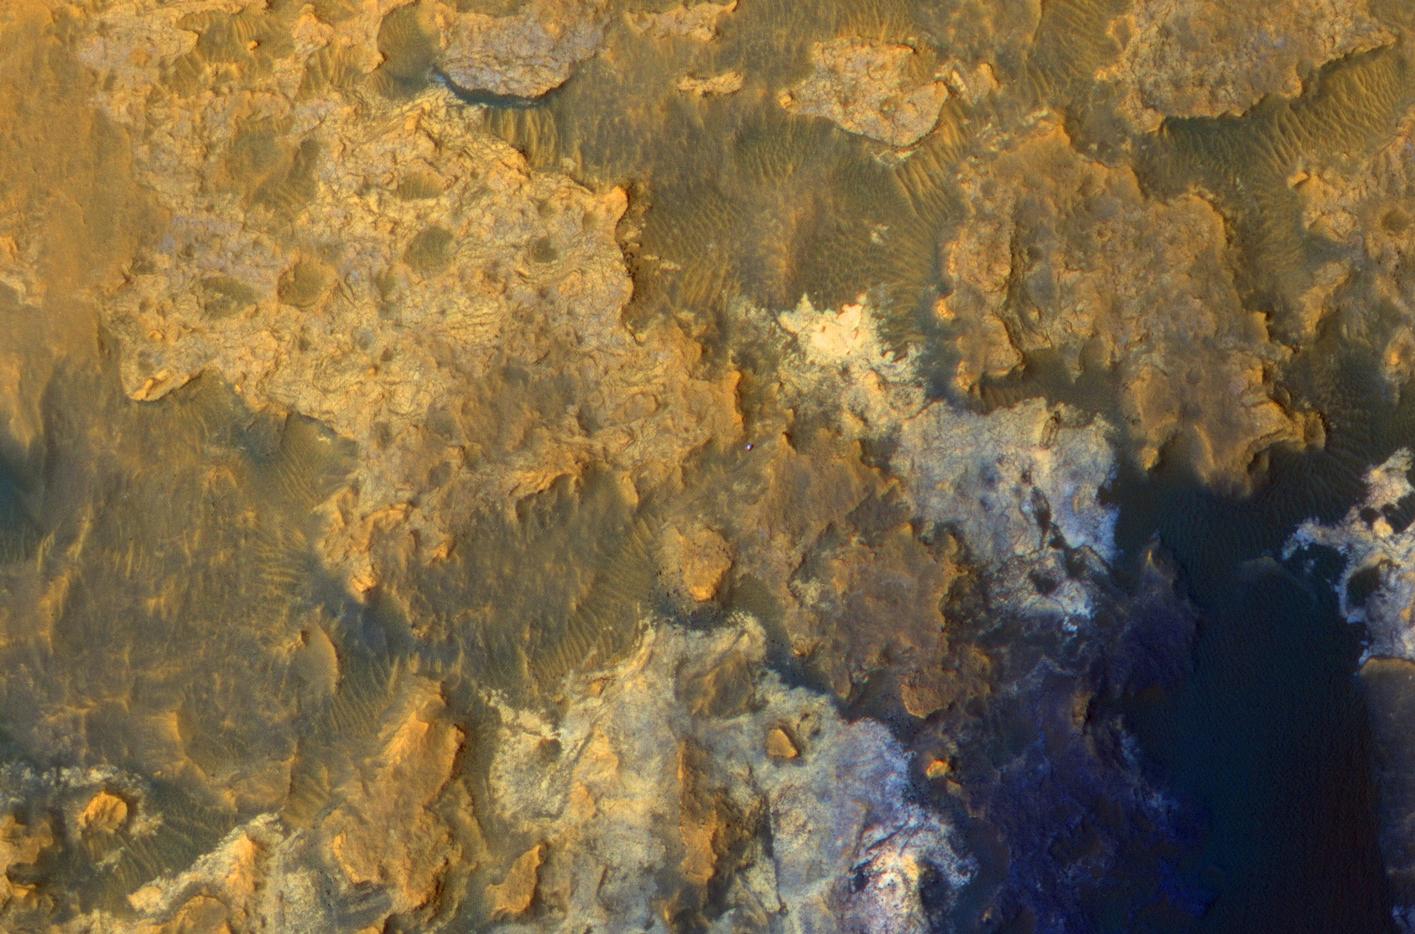 Mars Orbiter Sees Curiosity Rover in 'Artist's Drive' (Unlabeled)